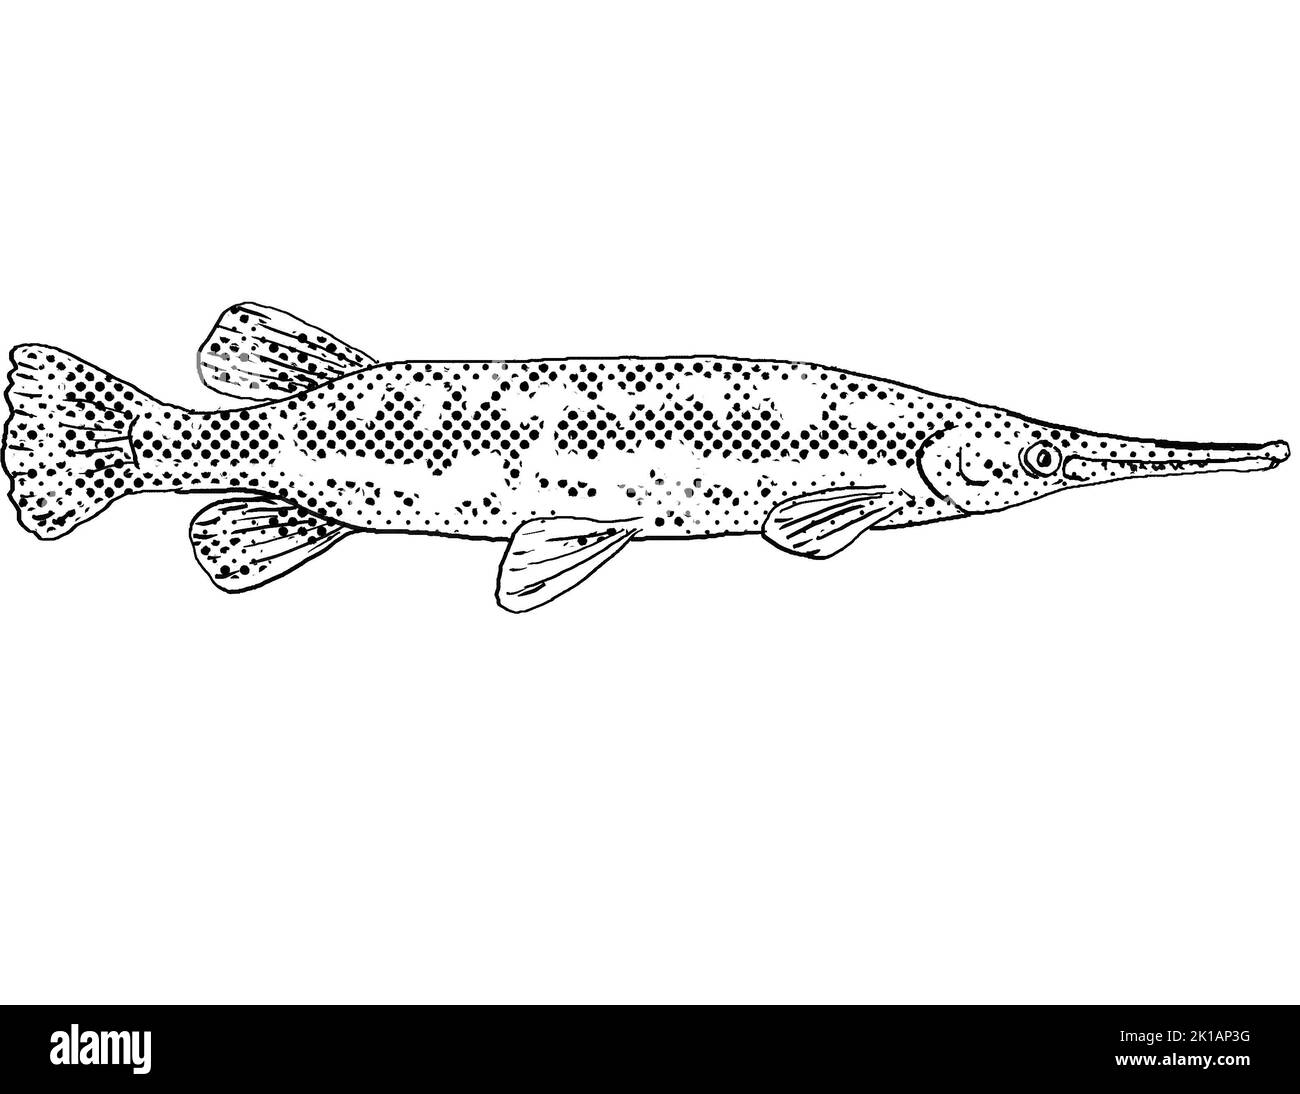 Cartoon style line drawing of a longnose gar Lepisosteus osseus, longnose garpike or billy gar a freshwater fish endemic to North America with halfton Stock Photo